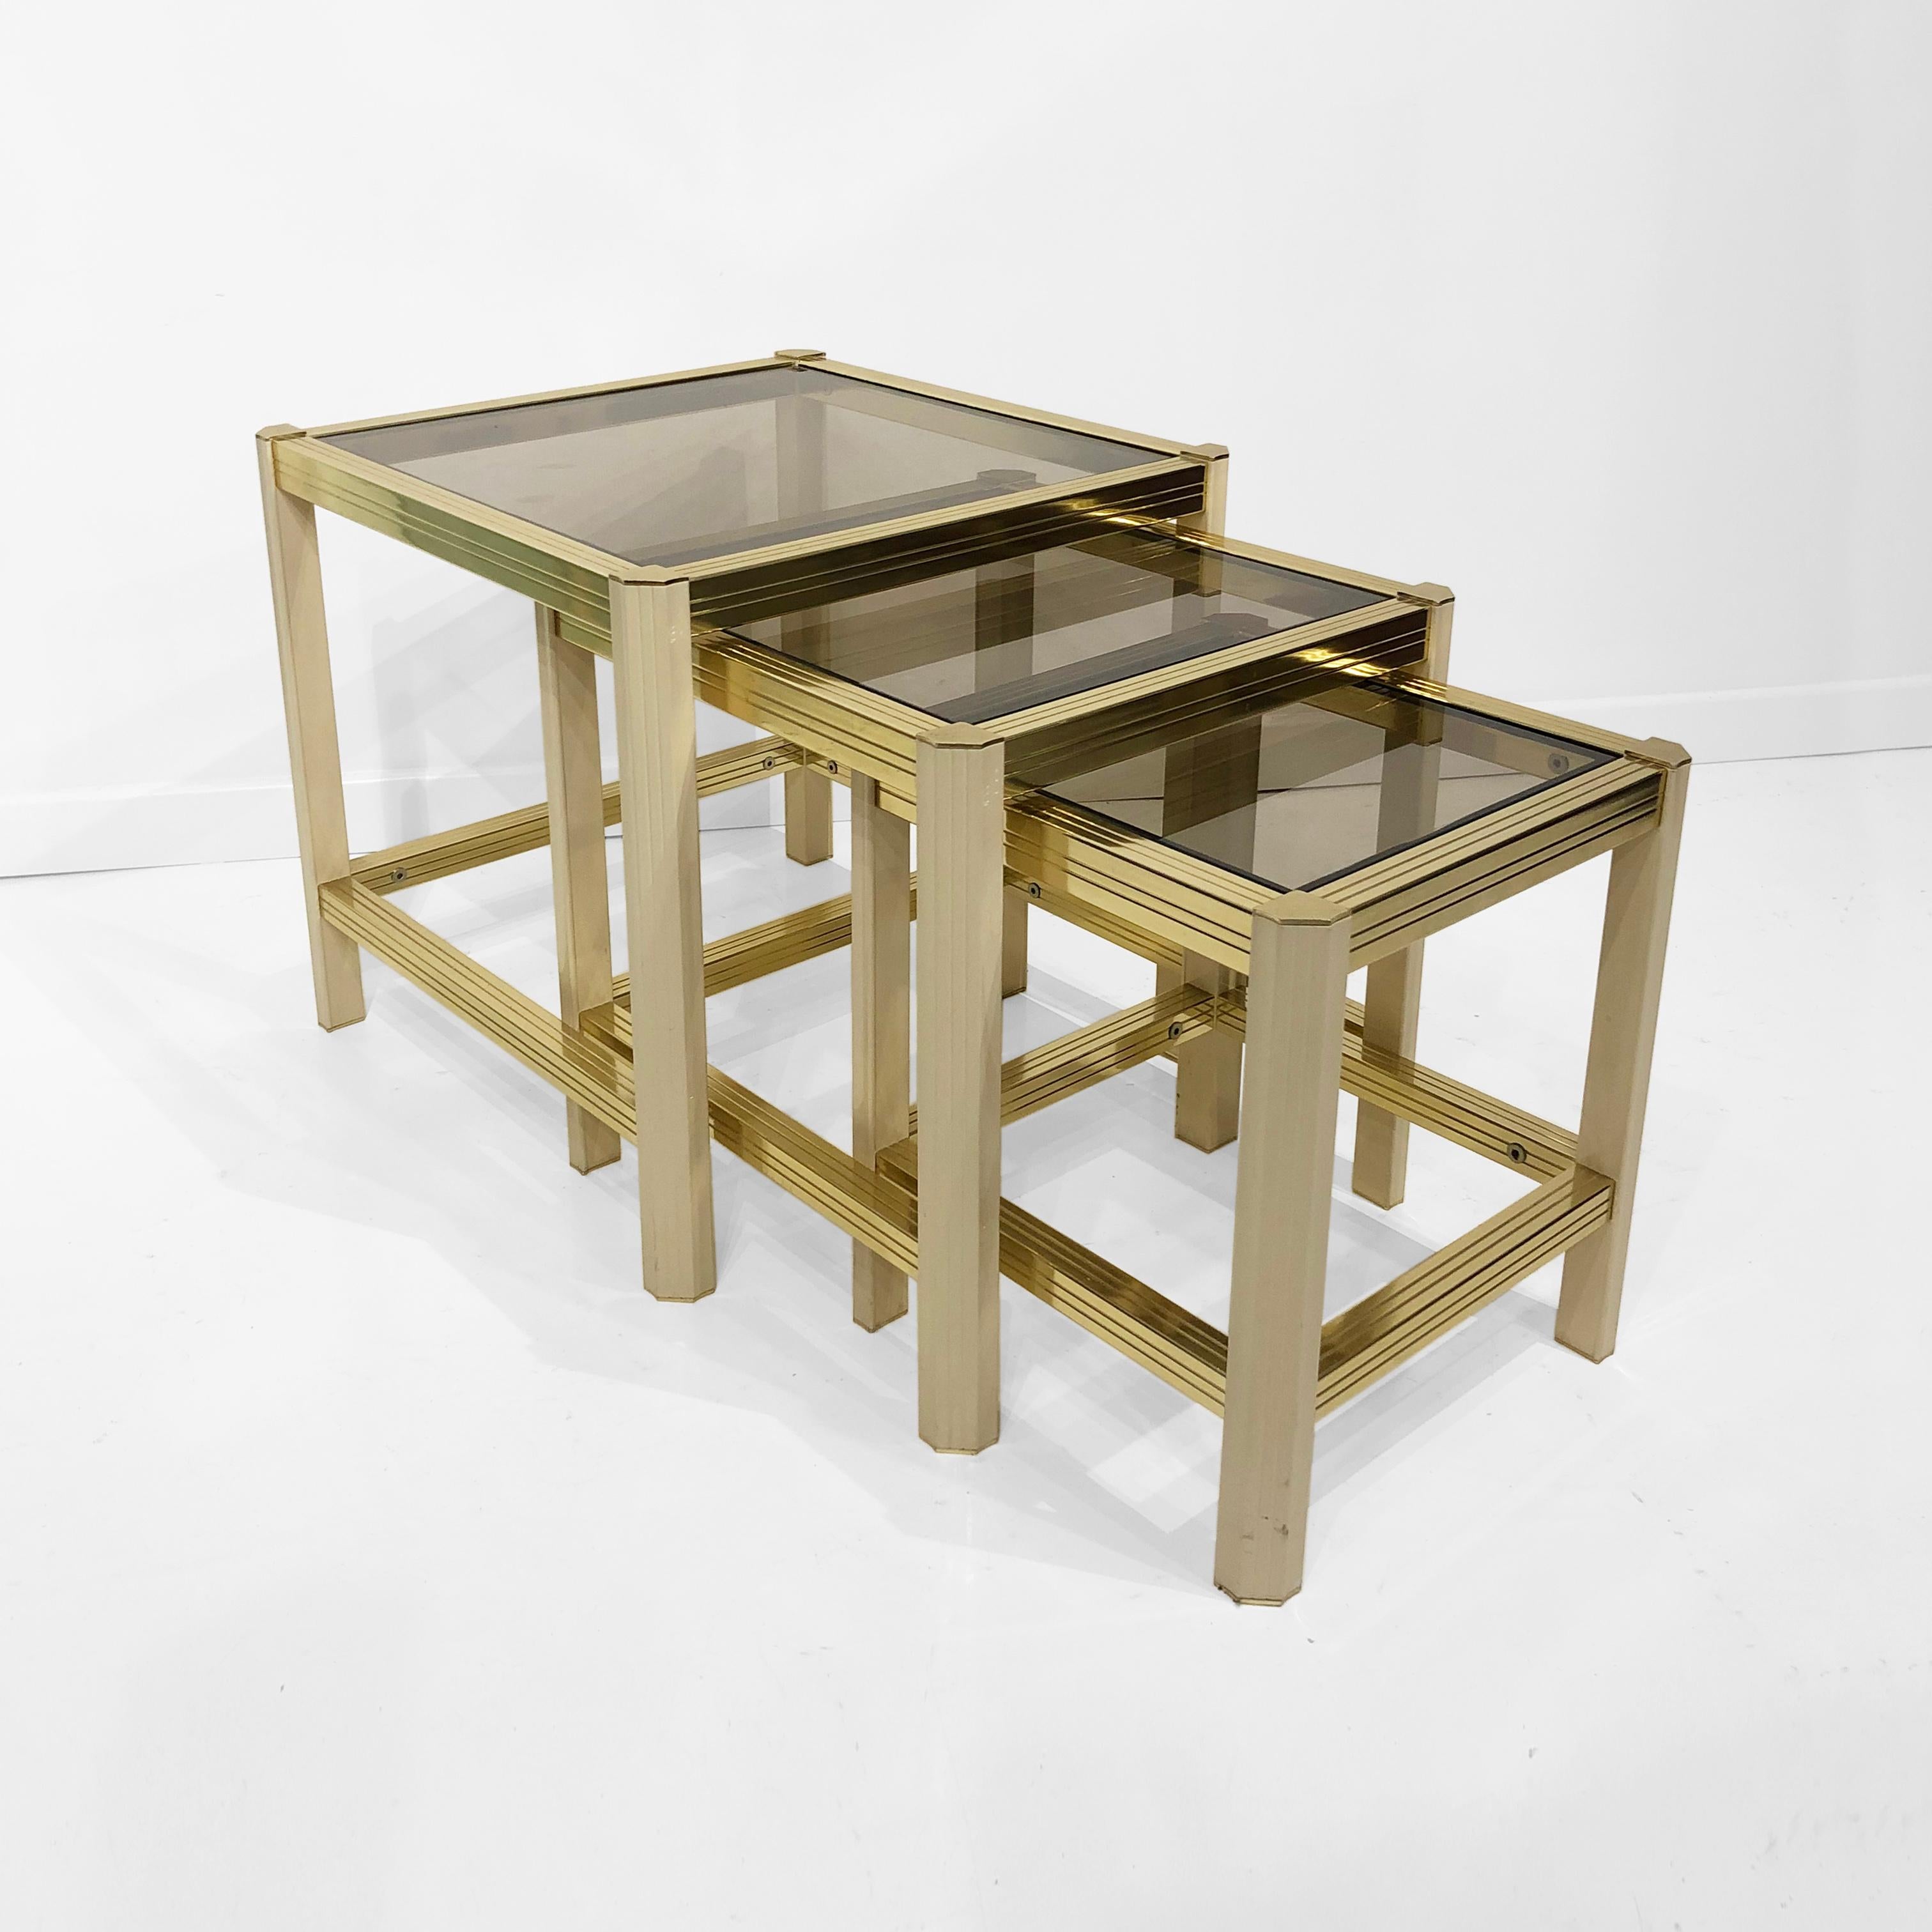 A trio of 1970s French nesting tables in a brass and cream-coated textured frame, with smoked glass tops. Each leg has a Pentagon shape with a light curve, and it is joined with the rigged brass plated bars. Very practical set of nest tables ideal